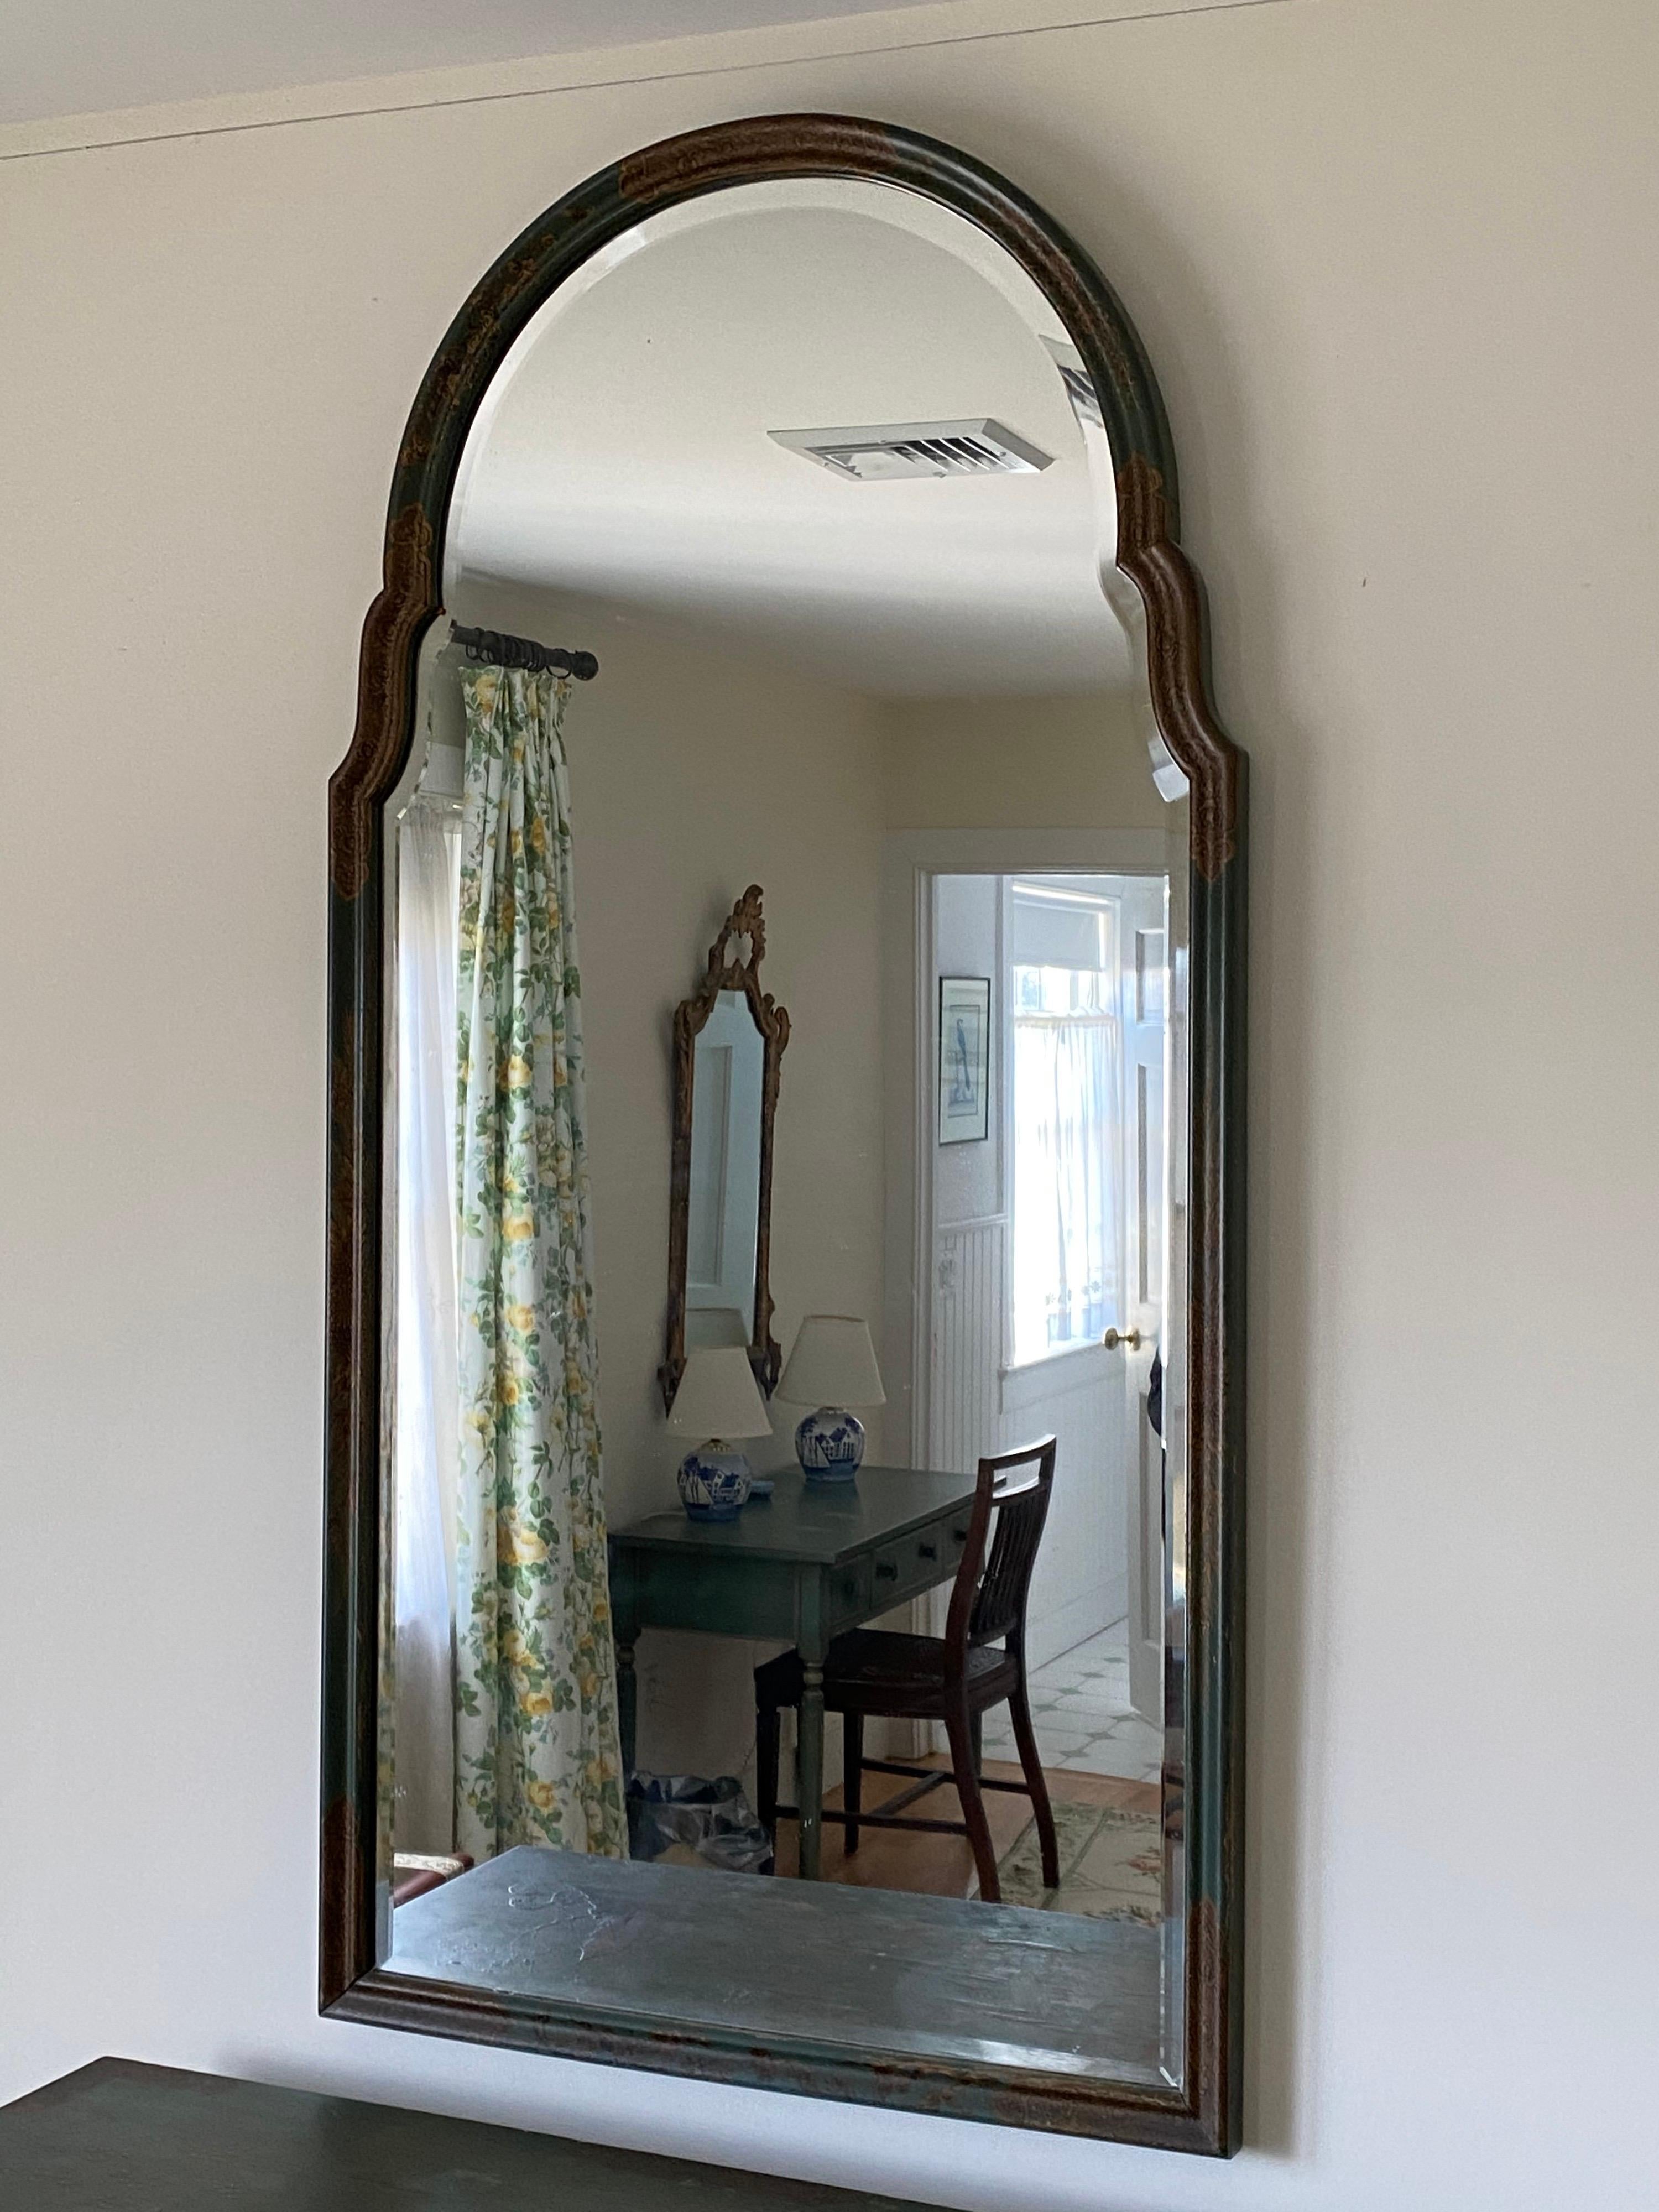 Queen Anne style japanned pier mirror in green with gilt.
The mirror with arched rectangular plate and conforming gilt and green borders.

Measures: 1.75